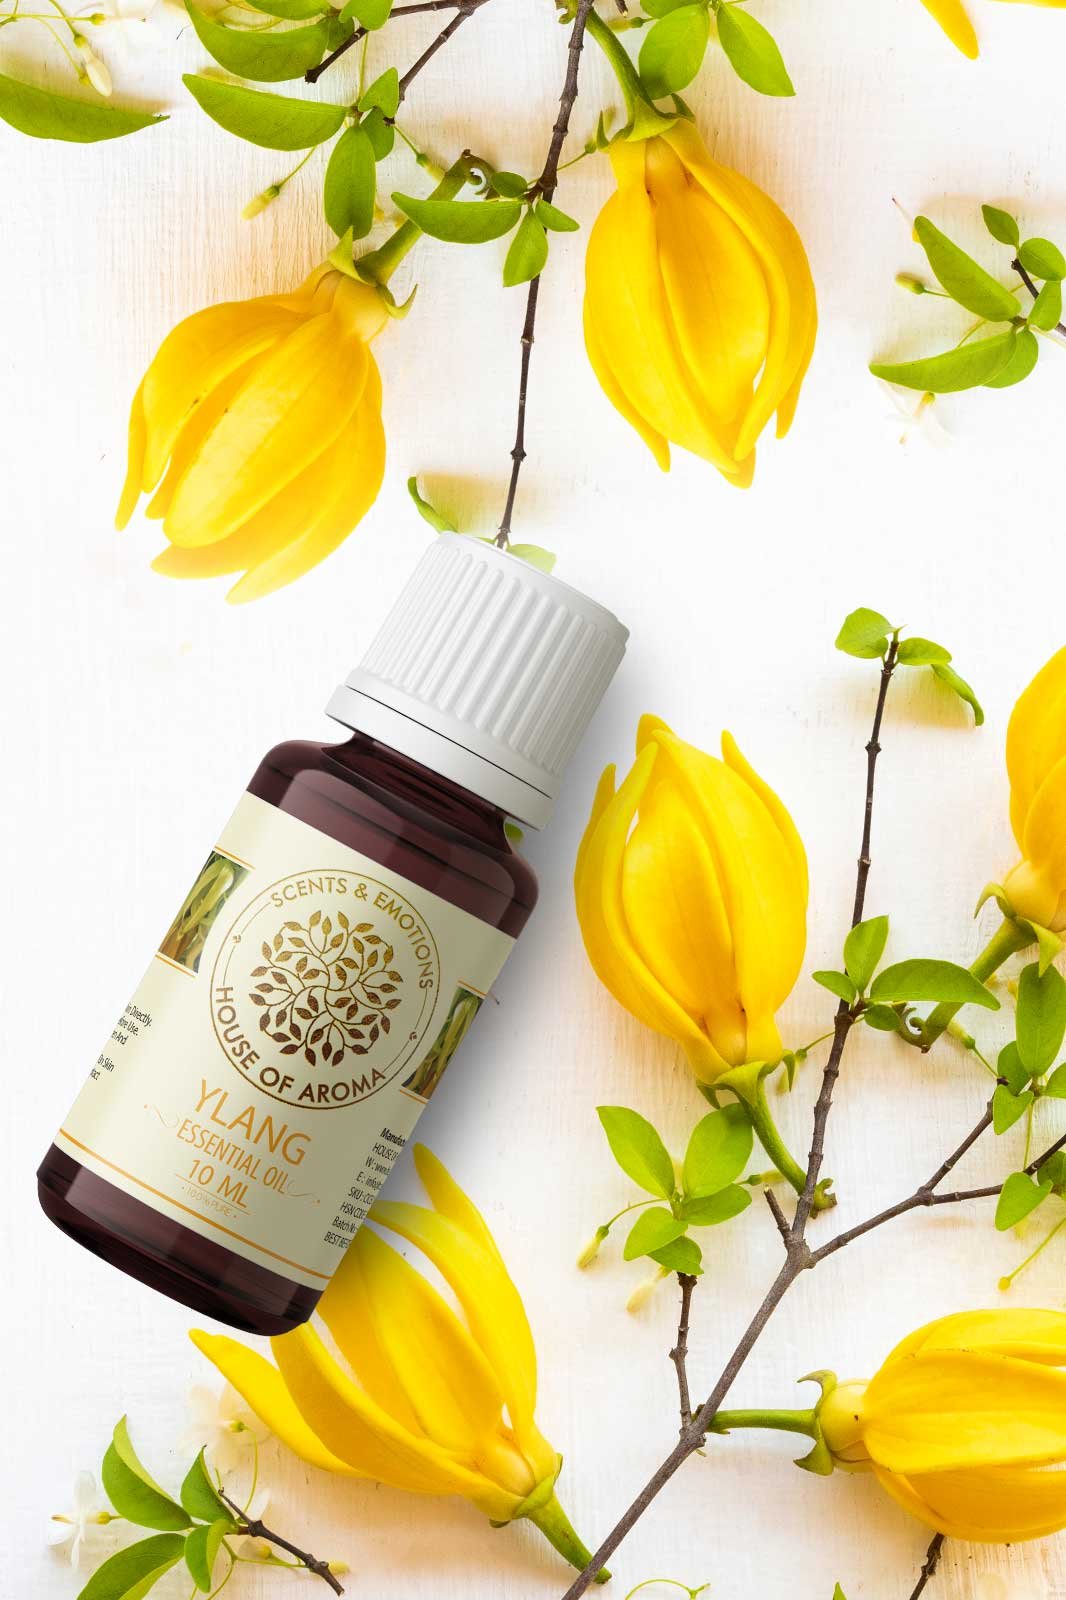 ylang essential oil, ylang ylang essential oil, ylang oil, ylang oil for hair, ylang oil for skin, ylang ylang oil, potent essential oil, ylang ylang essential oil for hair, essential oil, hair growth essential oil, organic essential oil, organic essential oil manufacturers, house of aroma